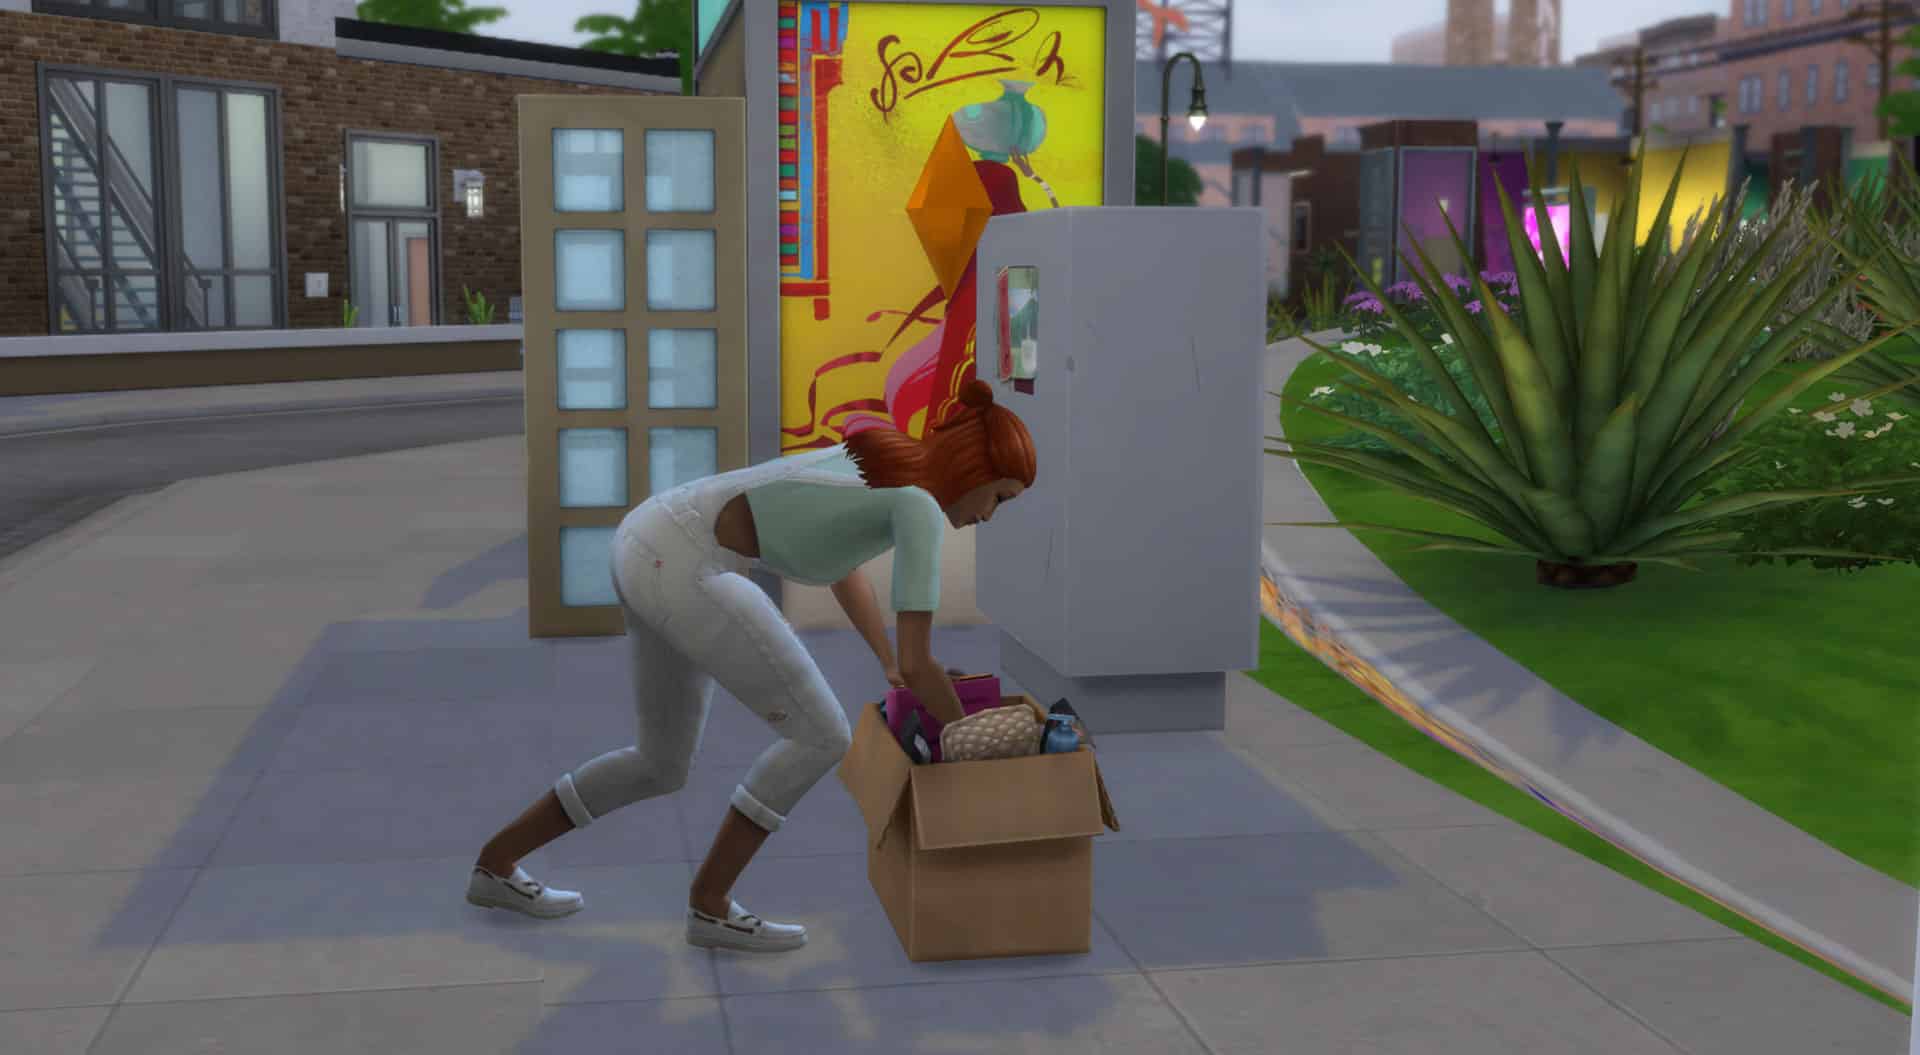 the sims 4 sim digging through box for snow globes to sell